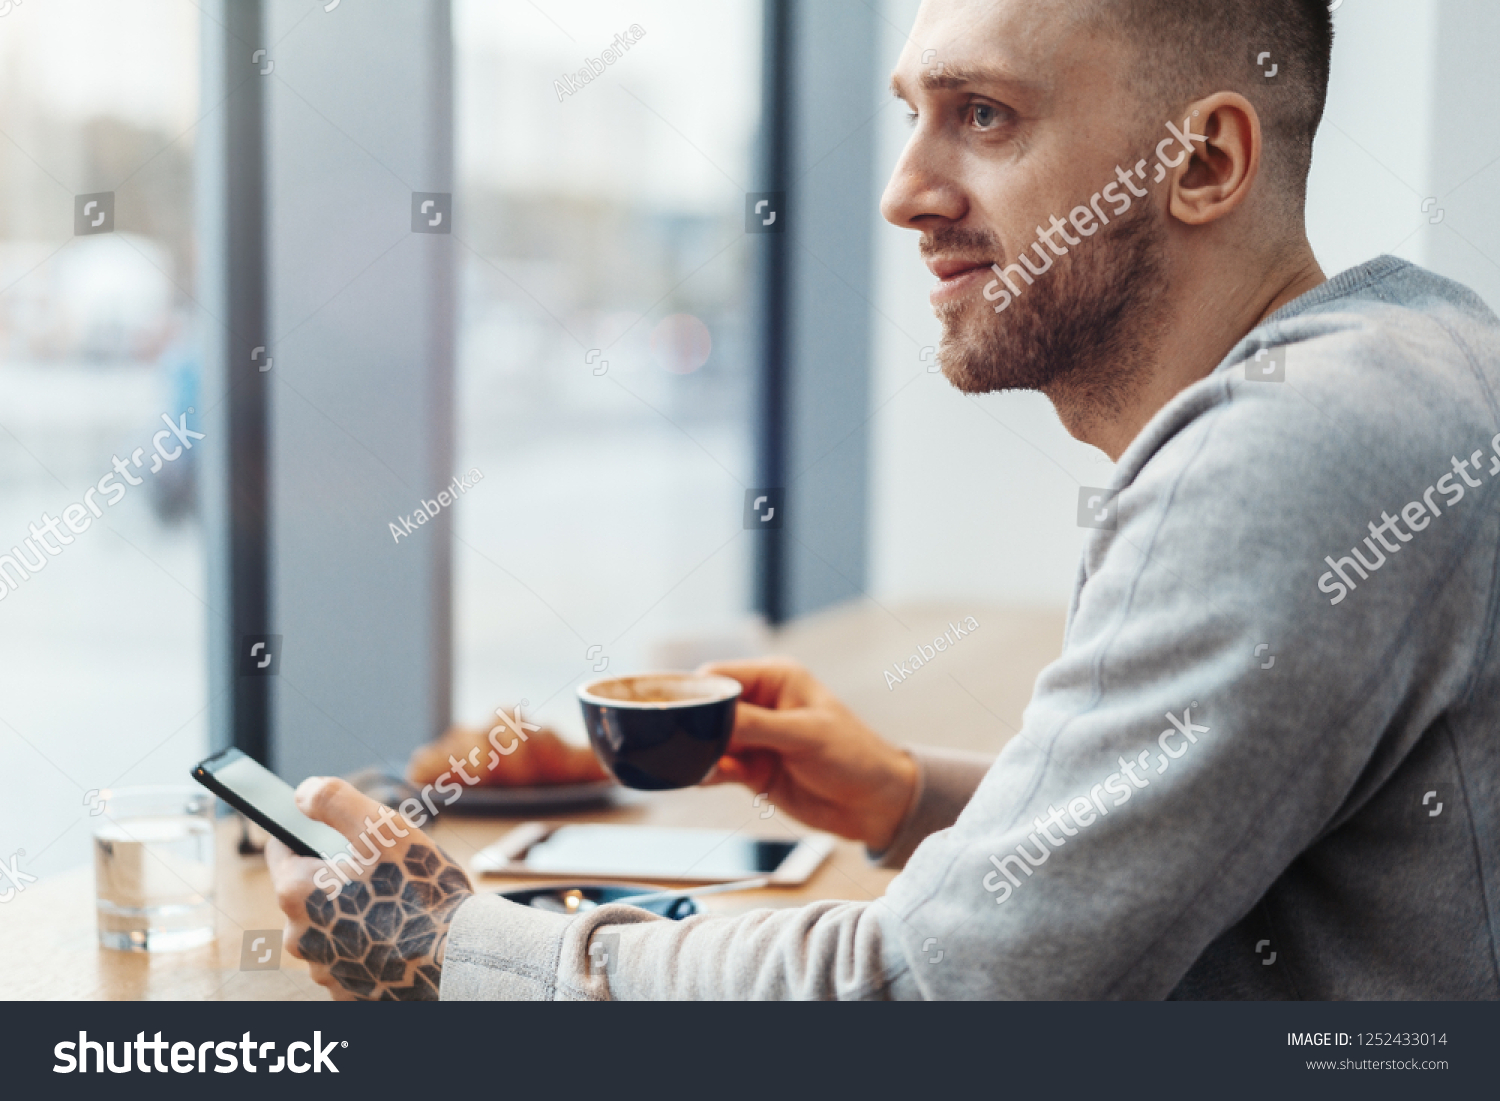 Close up of man with tattoo holding cup of coffee and mobile phone in cafe. #1252433014